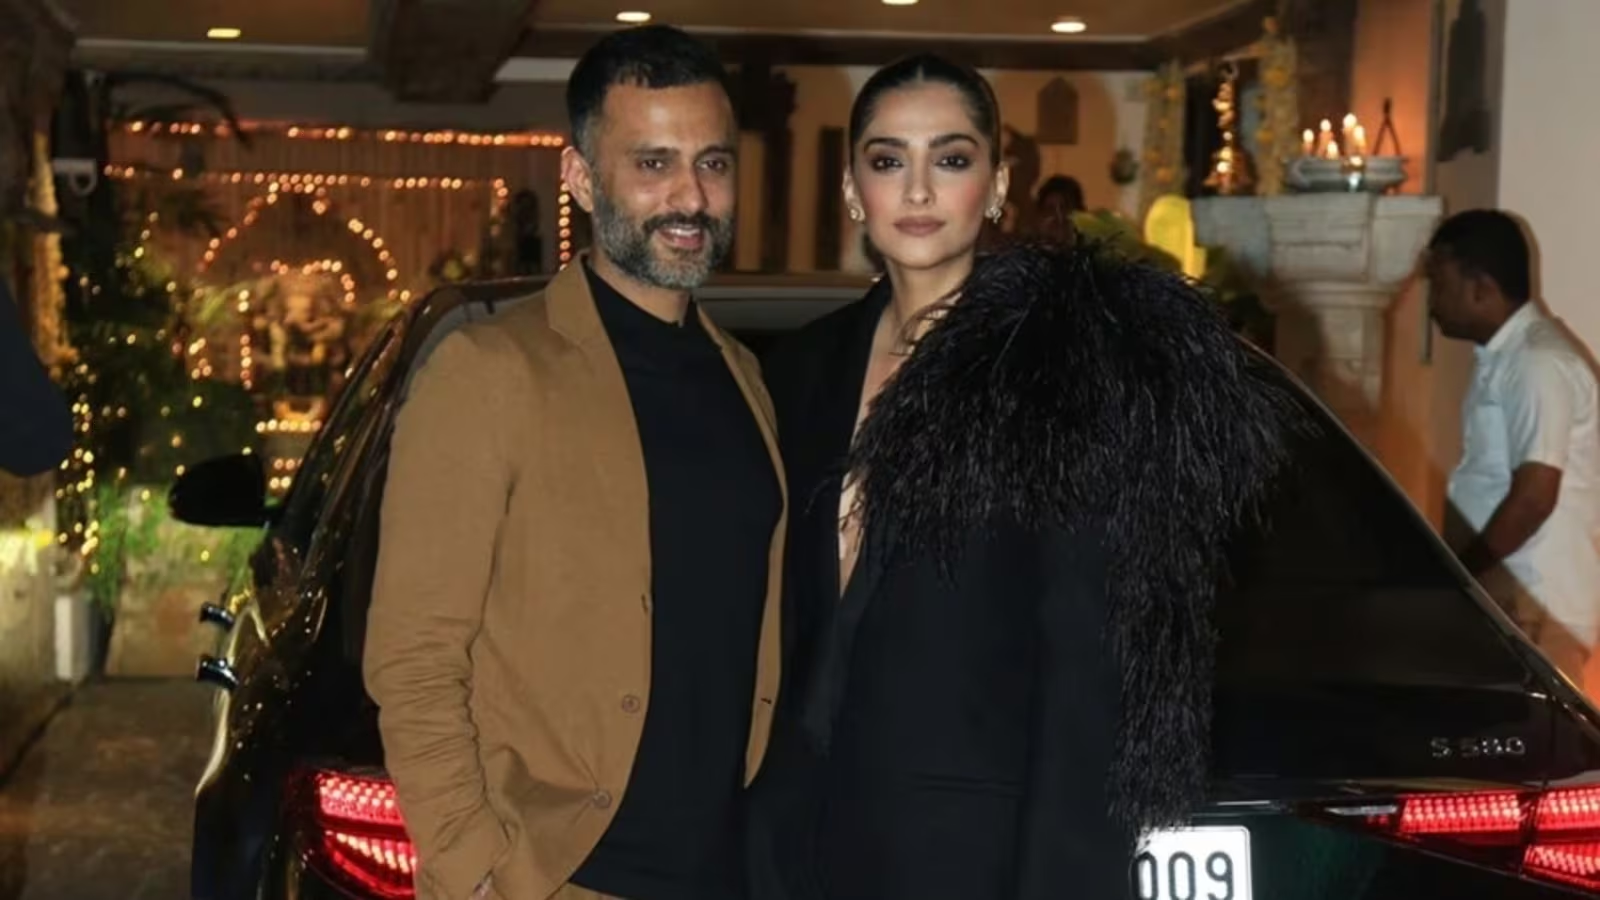 Sonam Kapoor and Anand Ahuja grace Javed Akhtar's birthday celebration; her commanding black suit epitomizes power dressing.